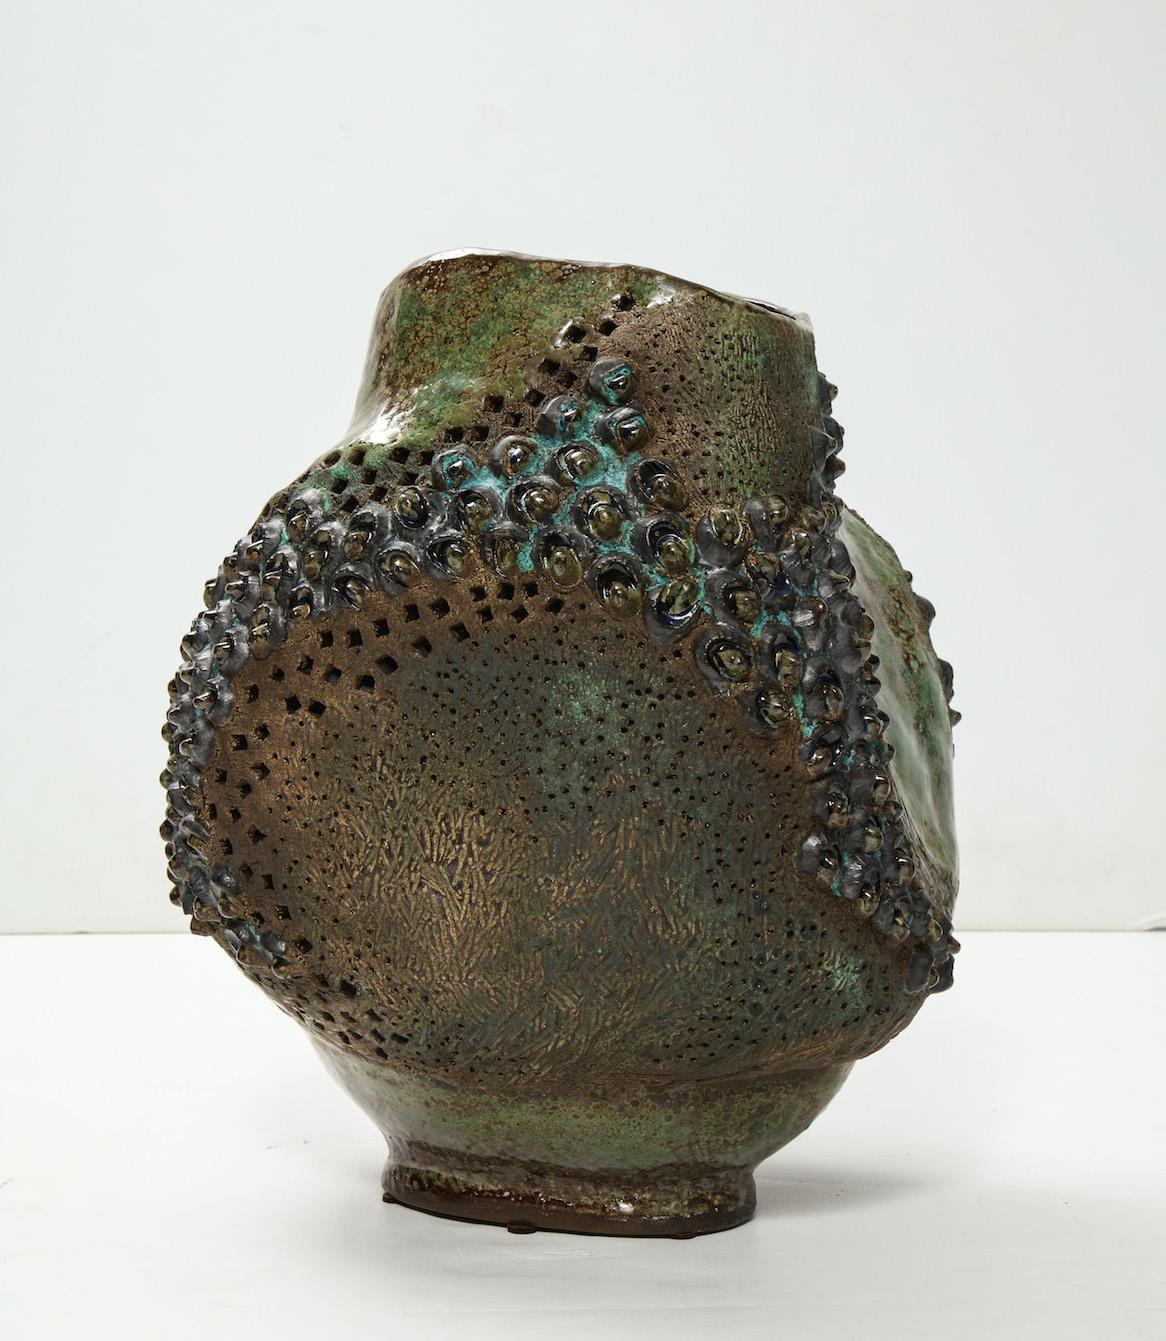 Fantastic hand-built vessel with great texture, irregular form and patterned holes throughout. High-fired glazes in earth tones. Artist signed and dated on underside.